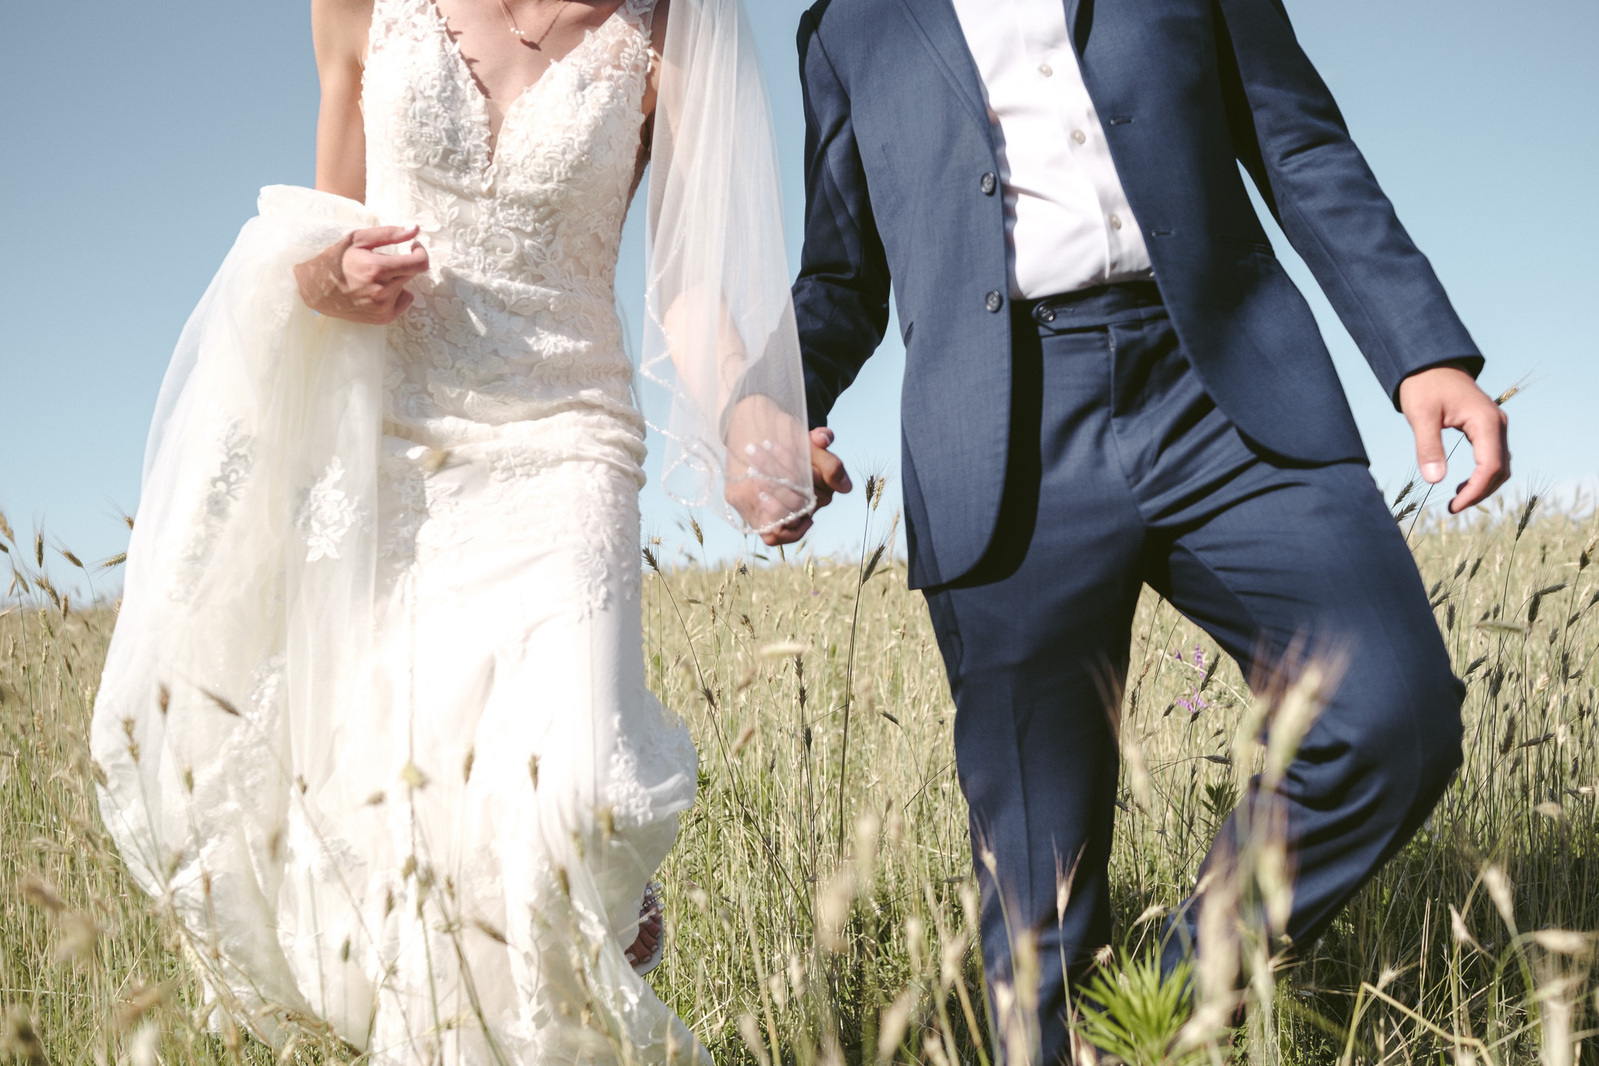 couple walks hand in hand through a field of tall grass on their wedding day.  white wedding dress, navy blue suit.  Green grass and blue sky